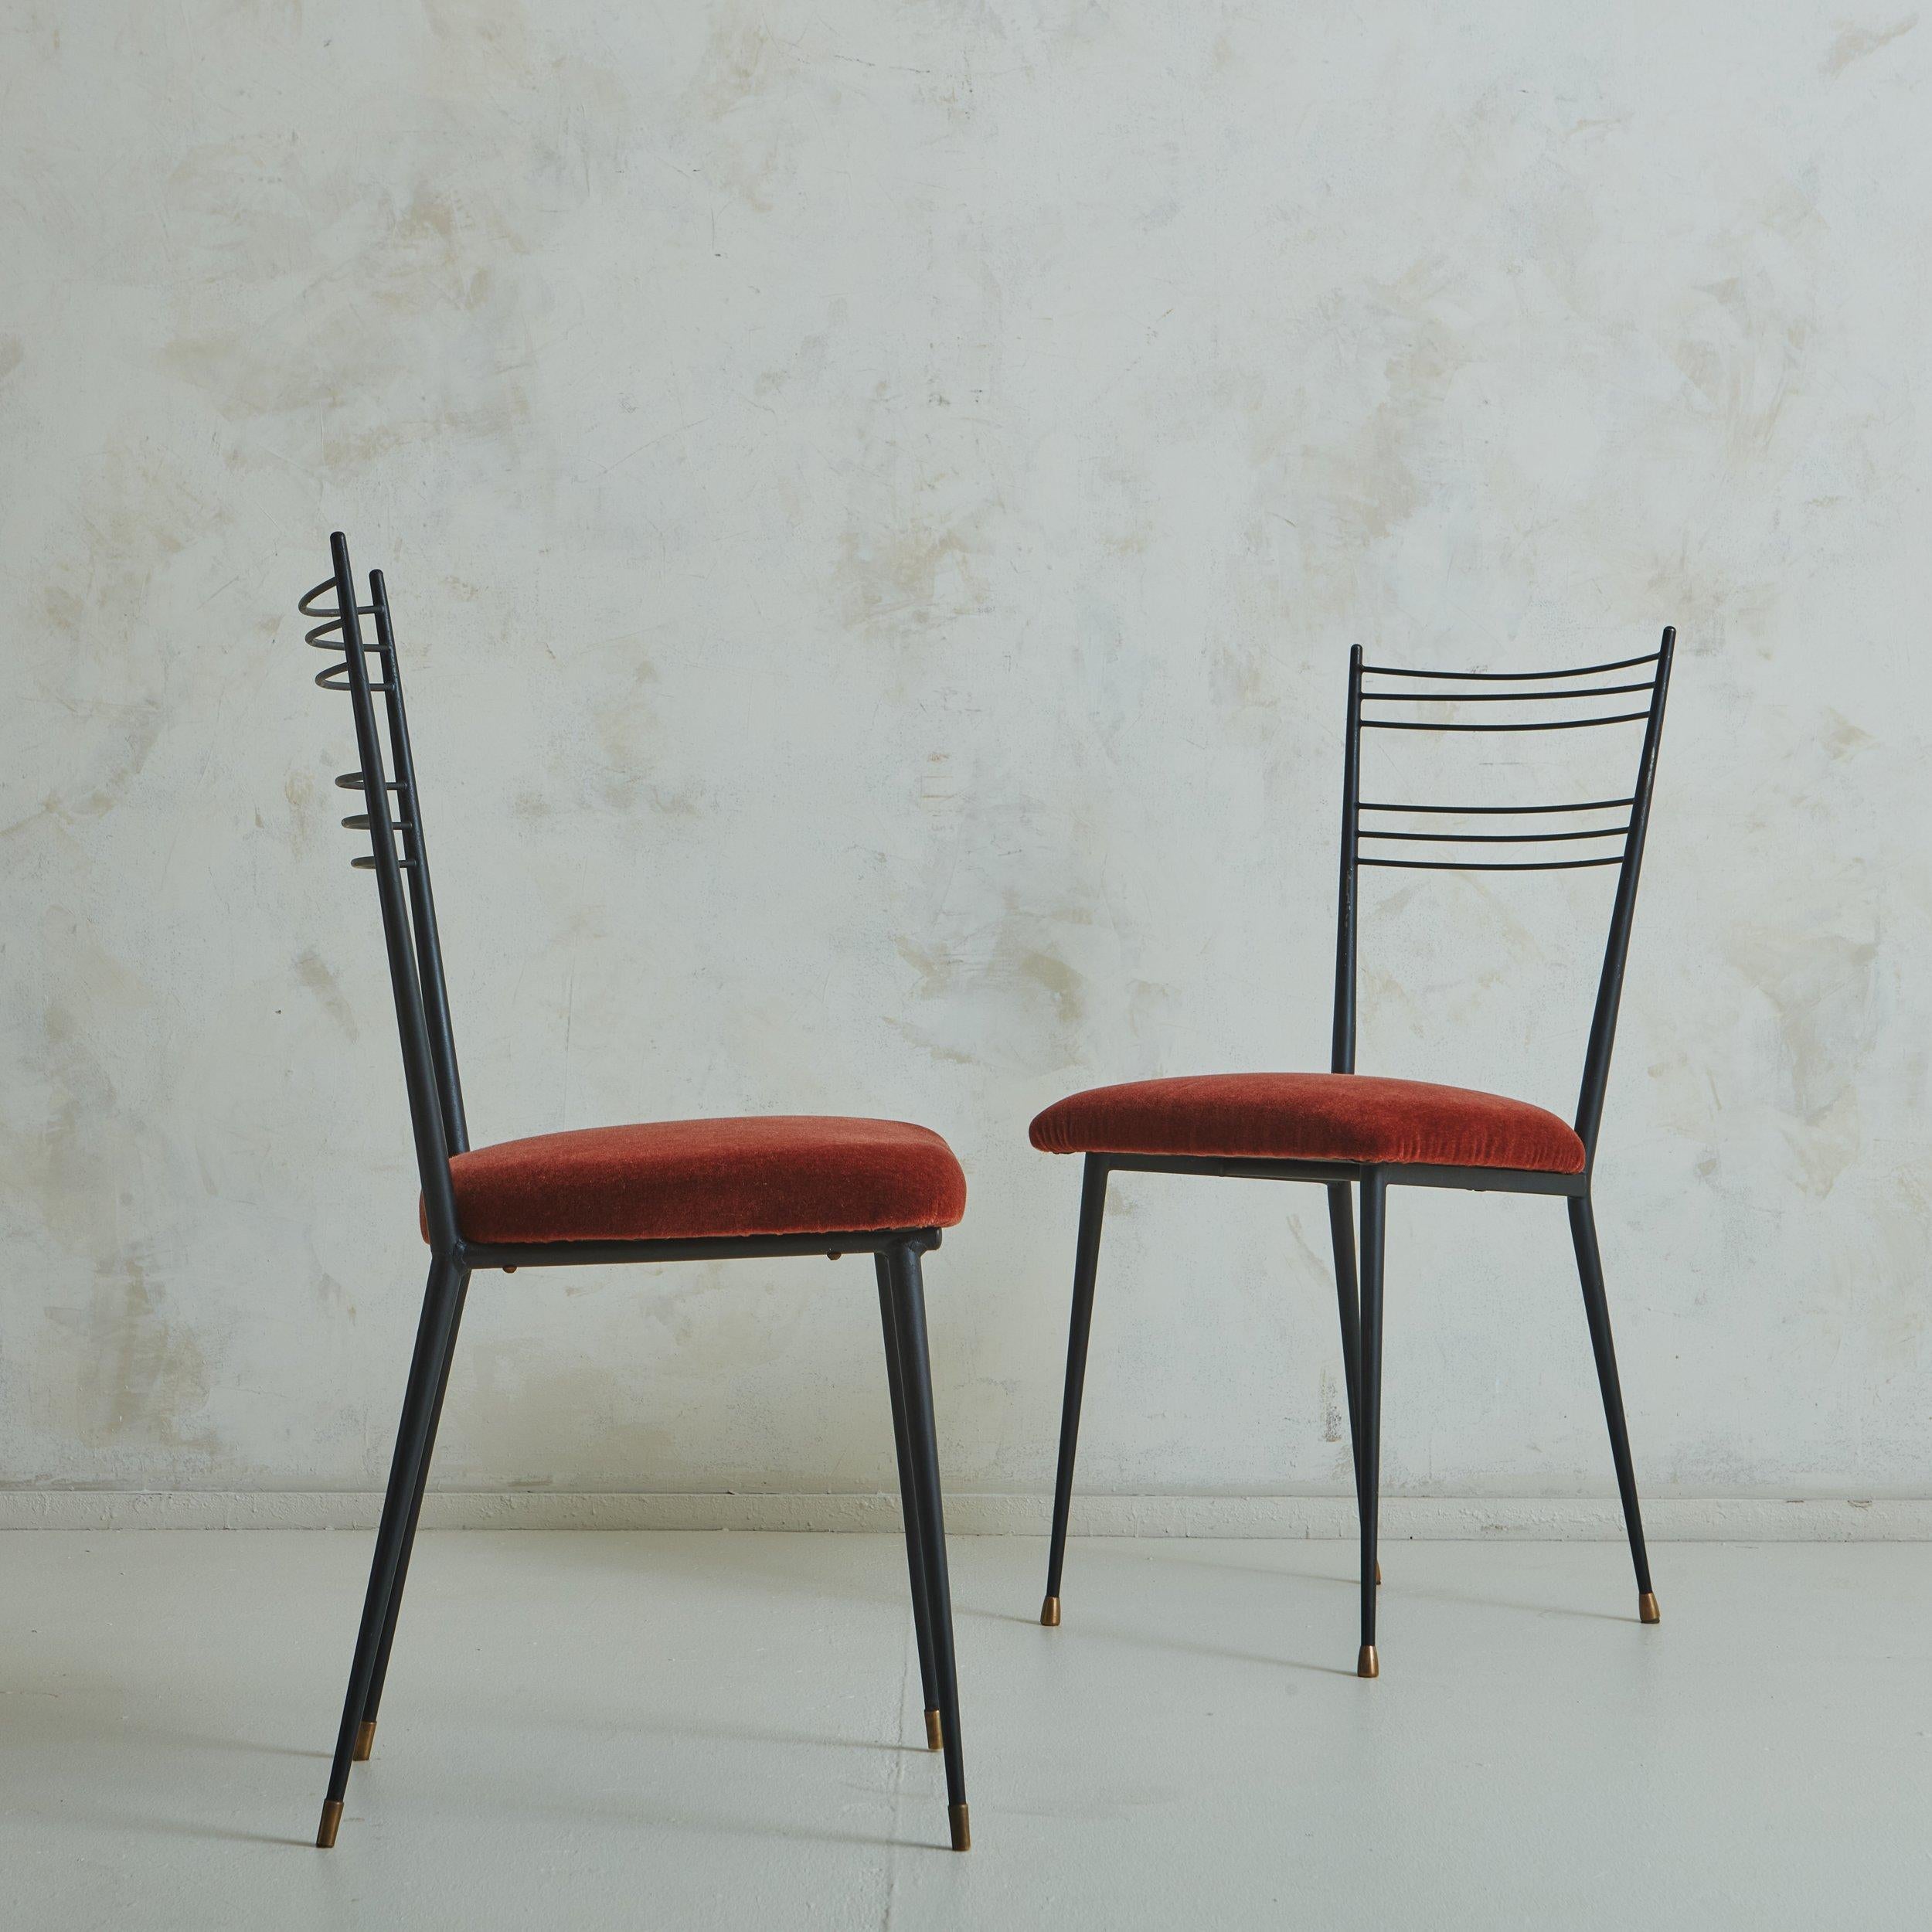 Mid-20th Century Set of 4 Steel Dining Chairs in Rust Mohair Attributed to Colette Guedon For Sale